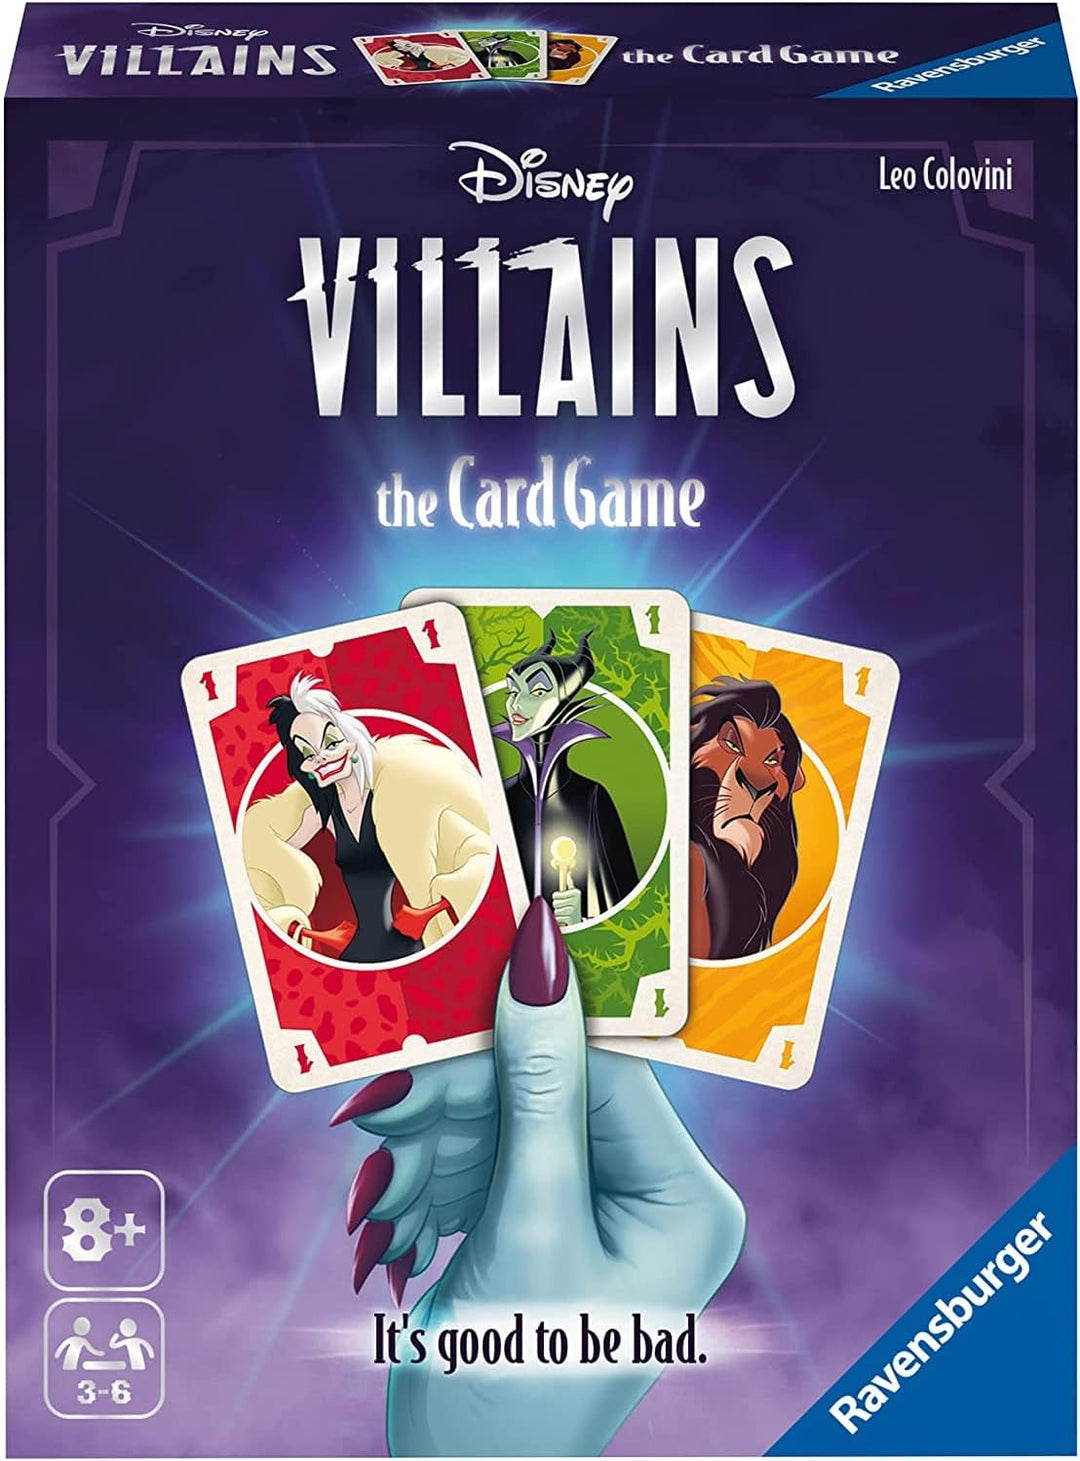 Ravensburger Disney Villains Card Games for Kids Age 3 Years Up